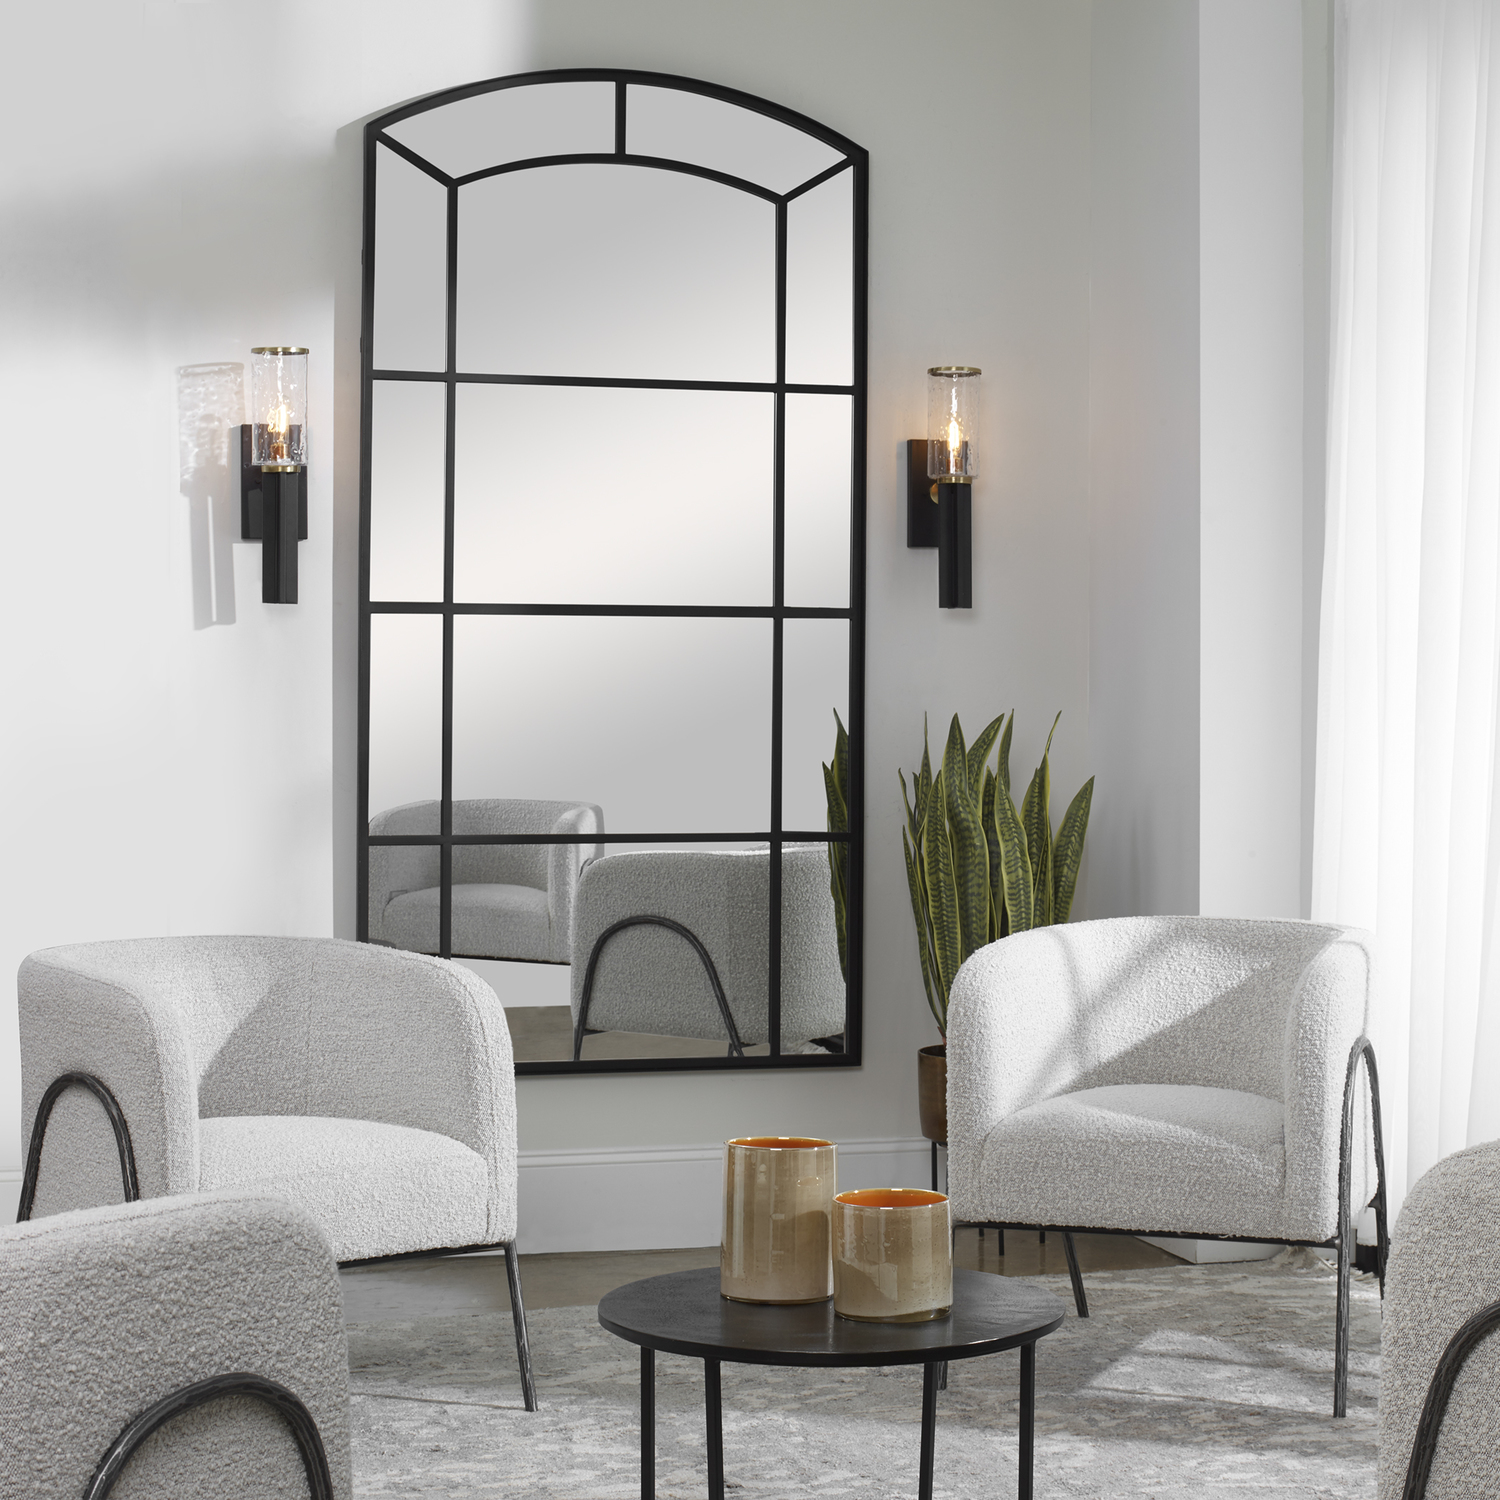 mirror wall with frame Uttermost Oversized Arch Mirror This Oversized Arch Mirror Features A Substantial Solid Iron Frame Finished In A Rich Satin Black, With A Deep Channeled Outer Edge.